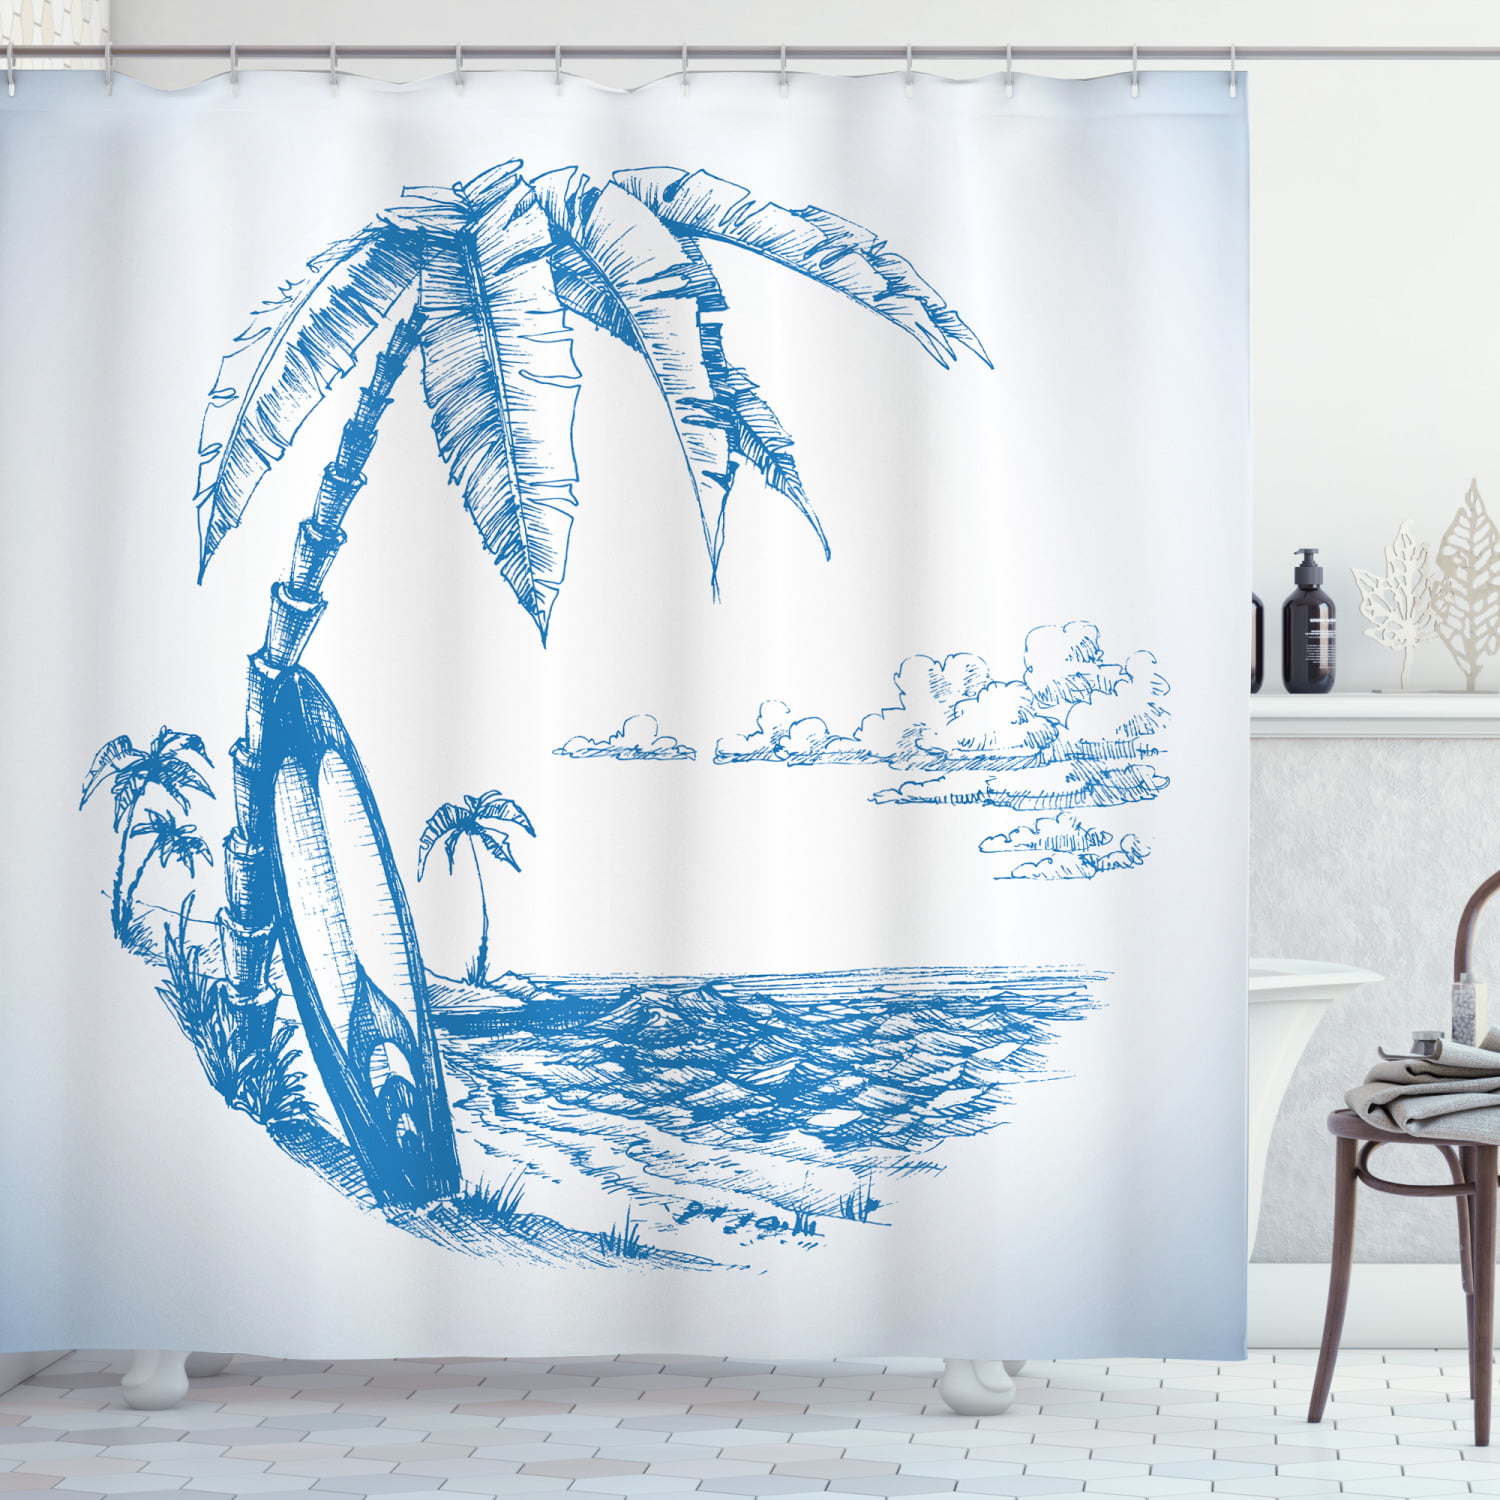 SURF'S UP SHOWER CURTAIN POLYESTER FABRIC TEAL BLUE GREEN PALM TREES BOARDS NEW 